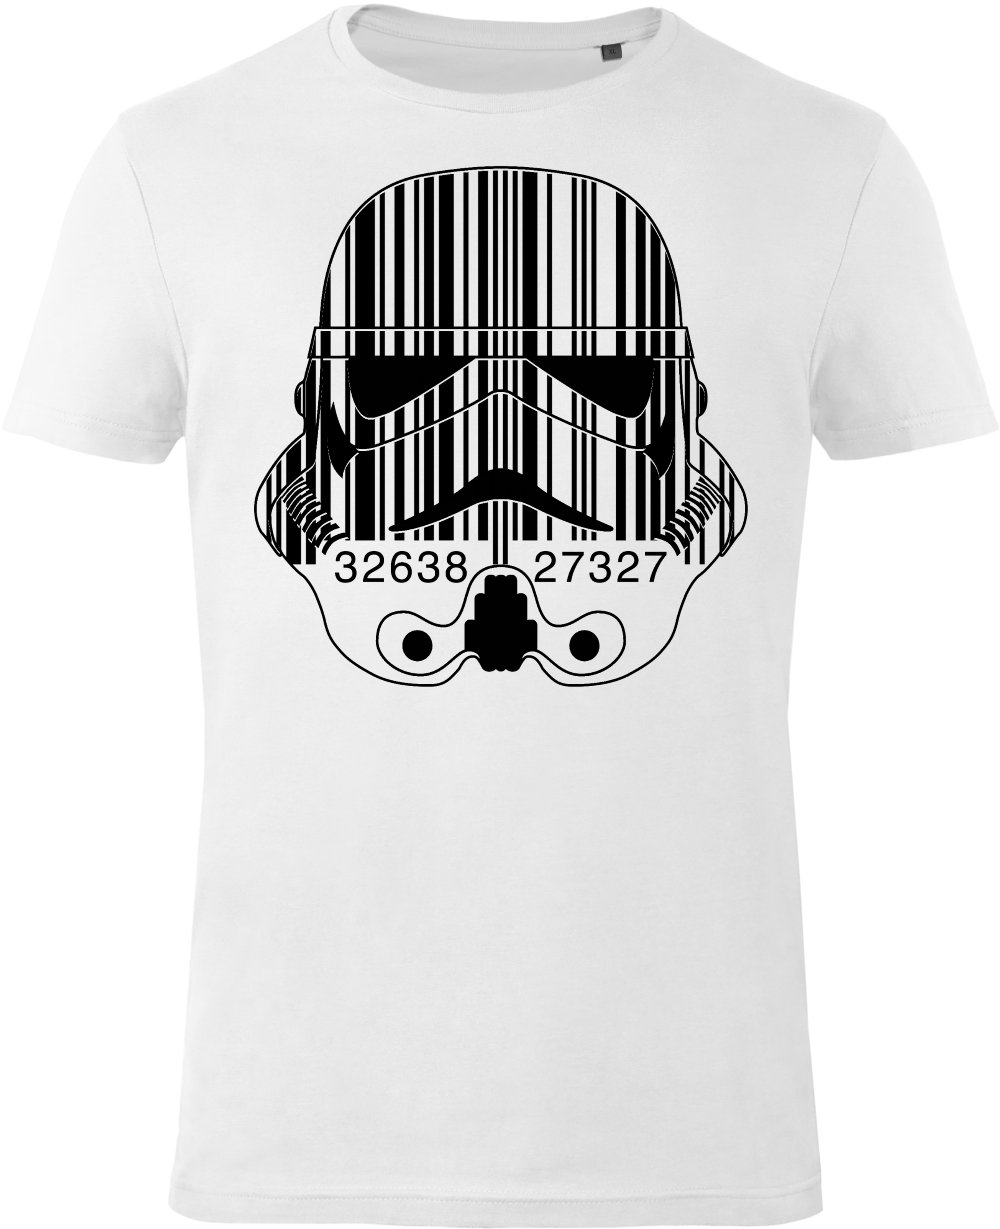 Imperial Stormtrooper - Barcode T-shirt画像